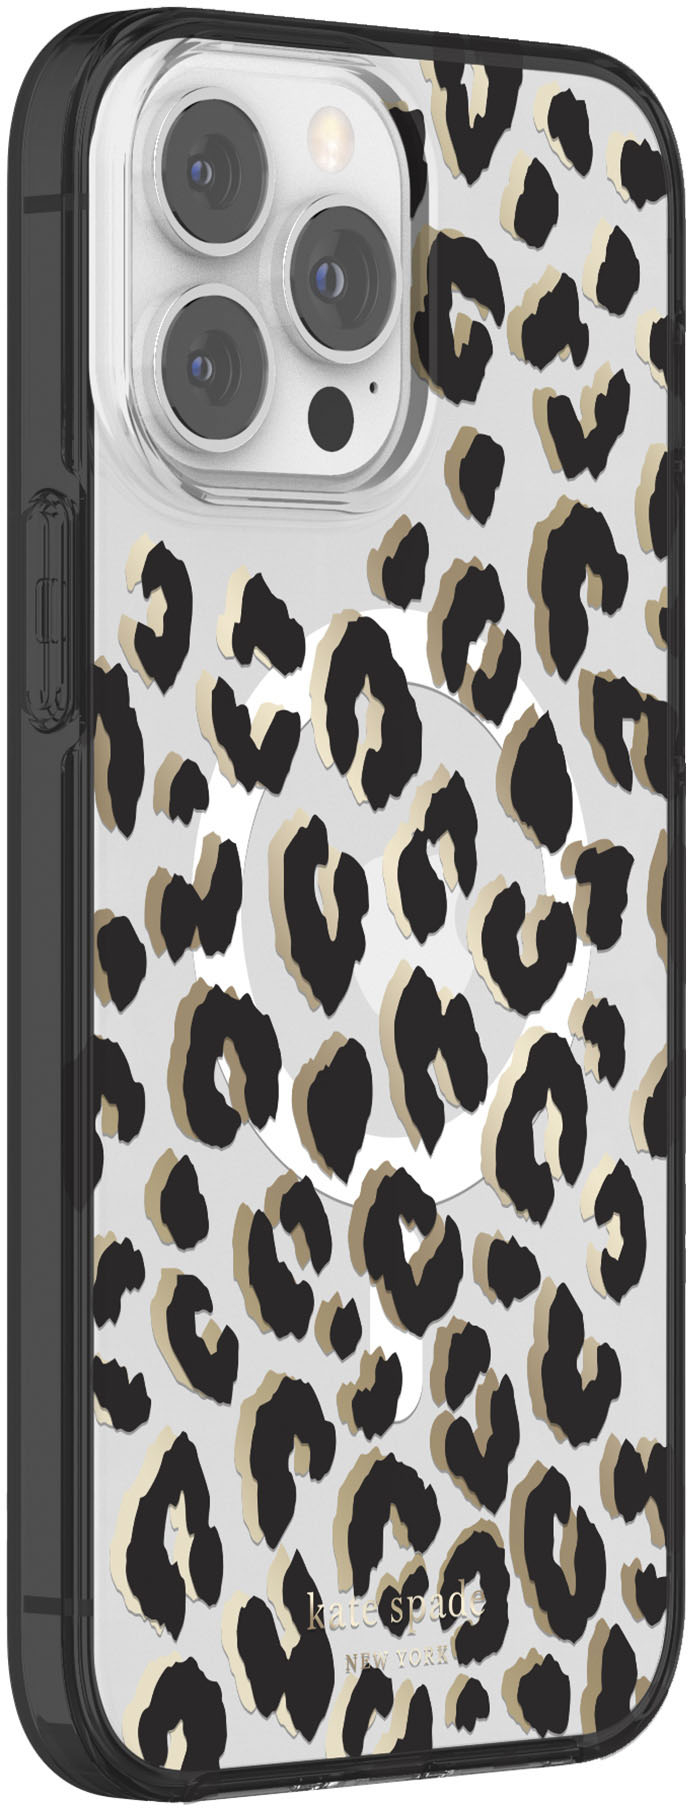 Left View: kate spade new york - Folio Case for Apple iPhone 12 & iPhone 12 Pro - Pale Vellum Crumbs